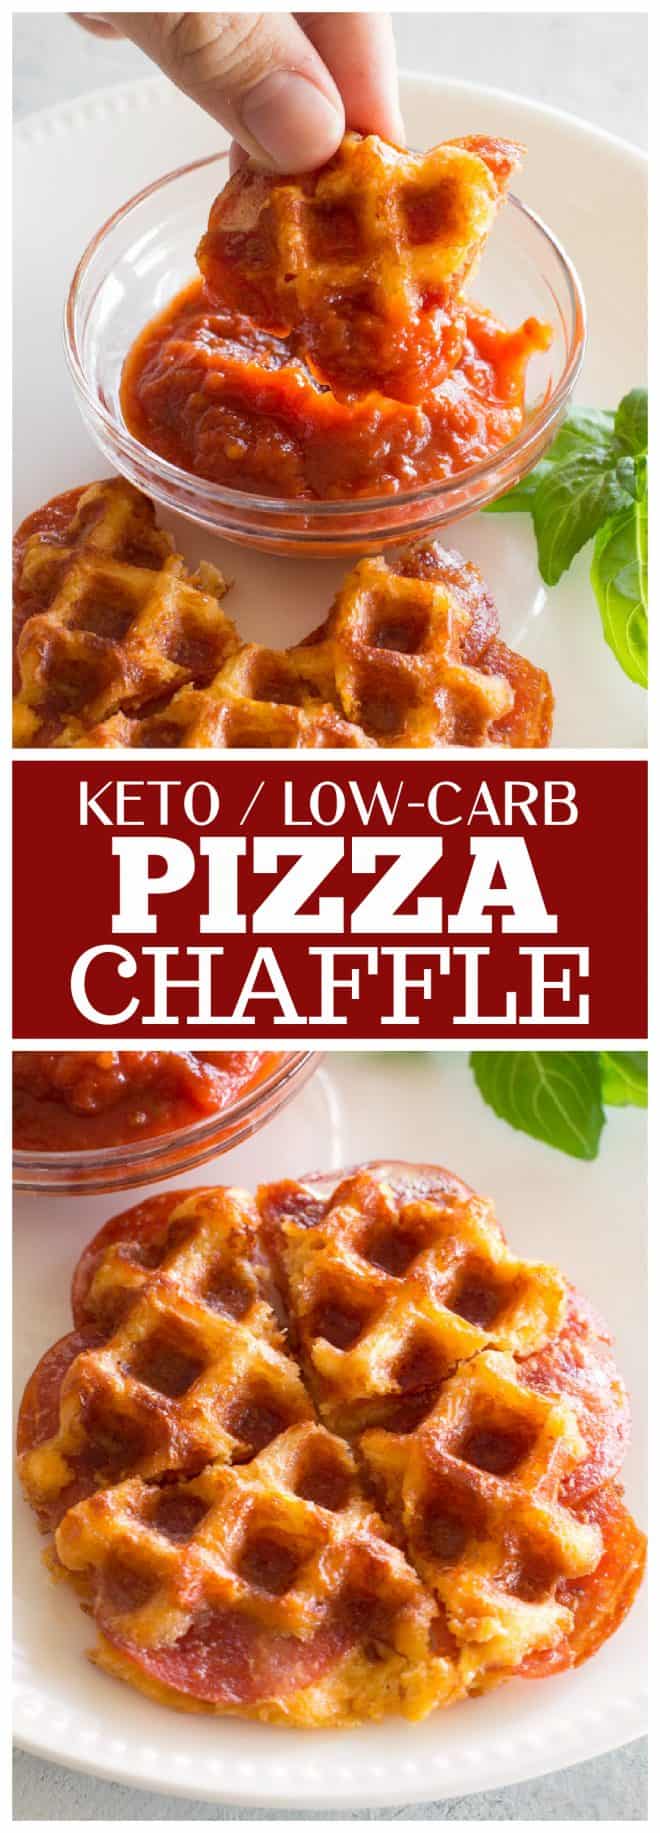 https://www.the-girl-who-ate-everything.com/wp-content/uploads/2021/05/keto-pizza-chaffle-660x1833.jpg